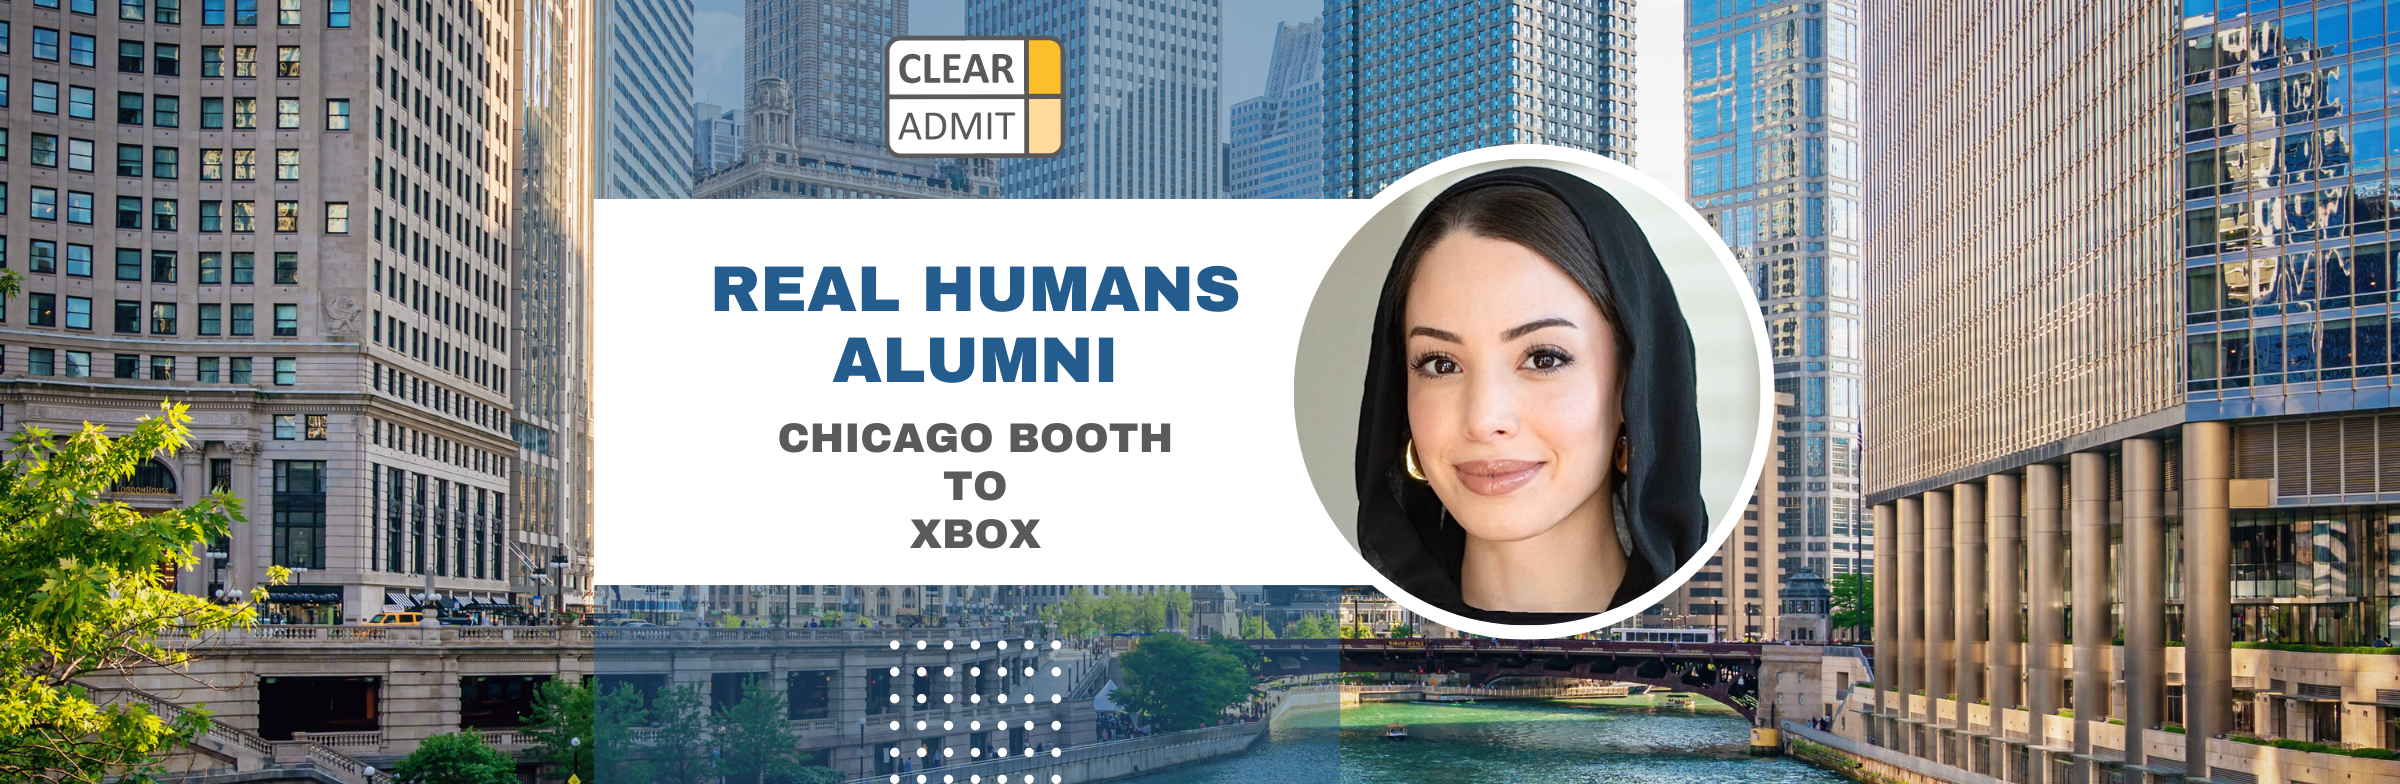 Image for Real Humans of Xbox: Noha Sahnoune, Chicago Booth MBA ’23, Growth and Content Demand